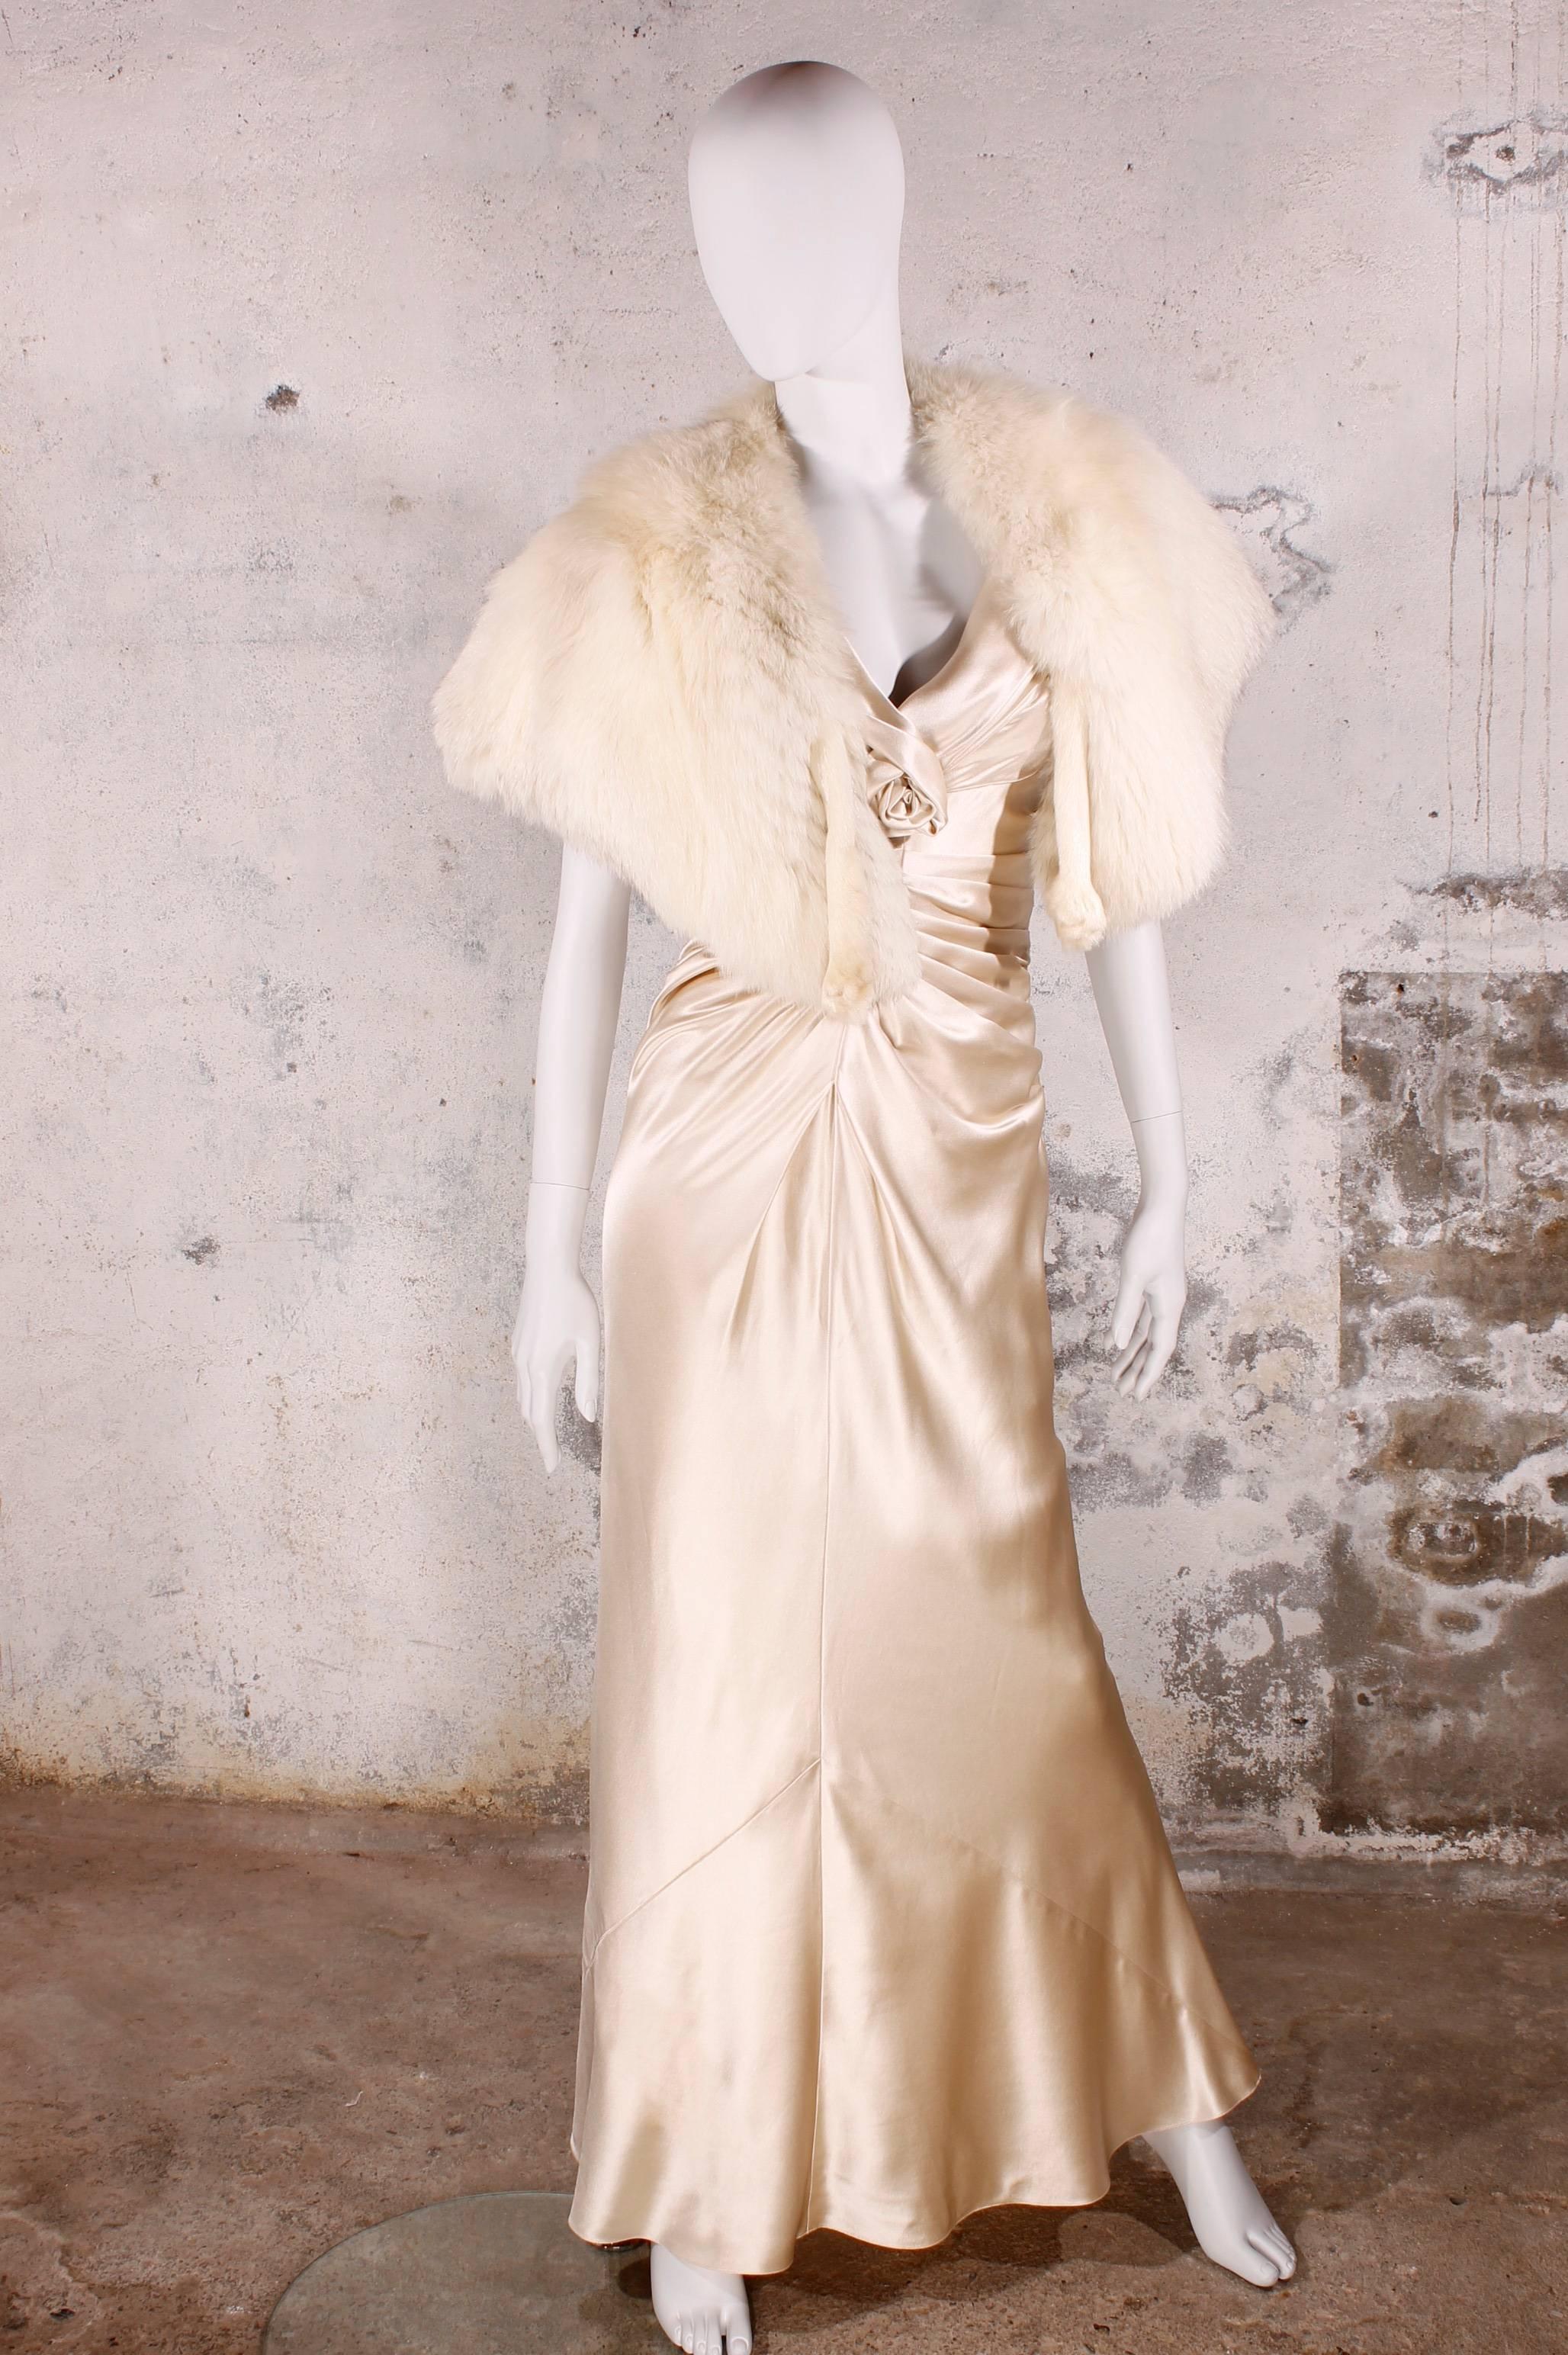 Christian Dior Champagne-colored Evening Gown 1